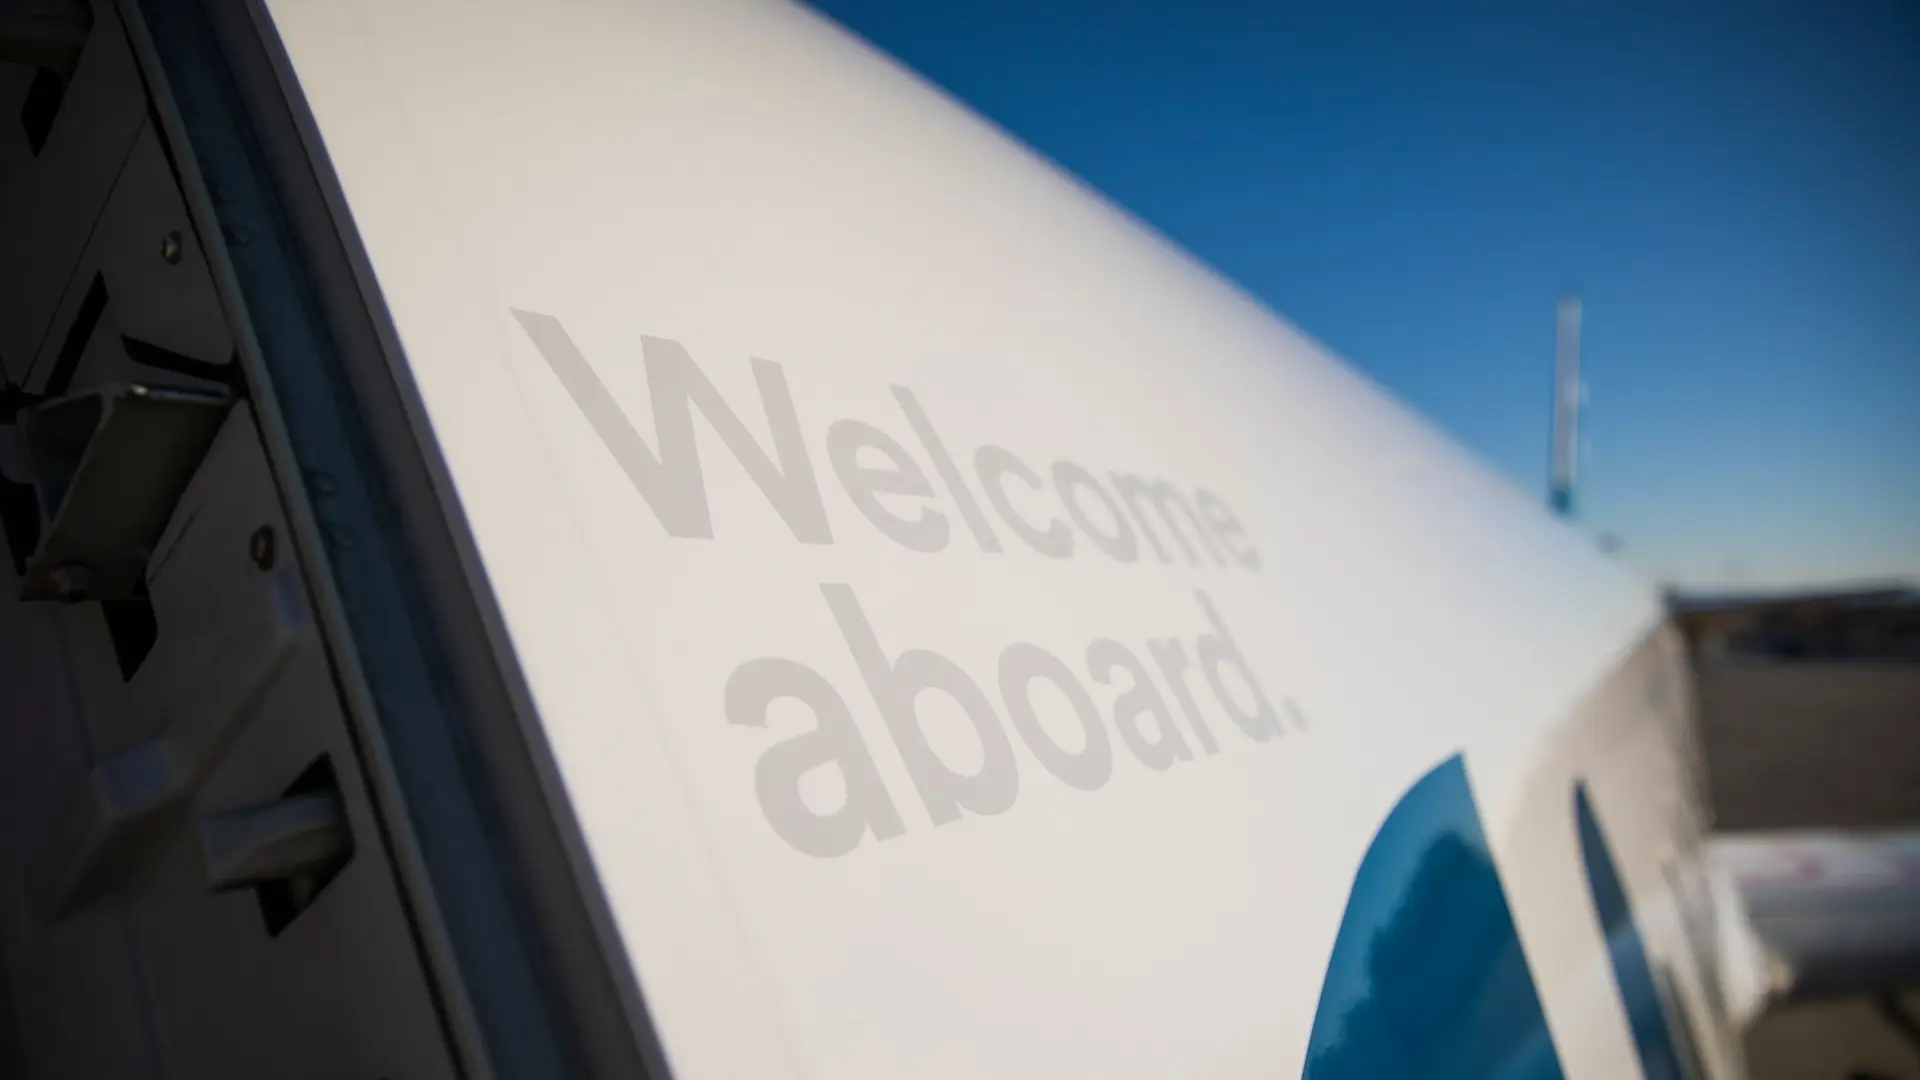 Airlines News - Alaska Airlines joins the oneworld alliance